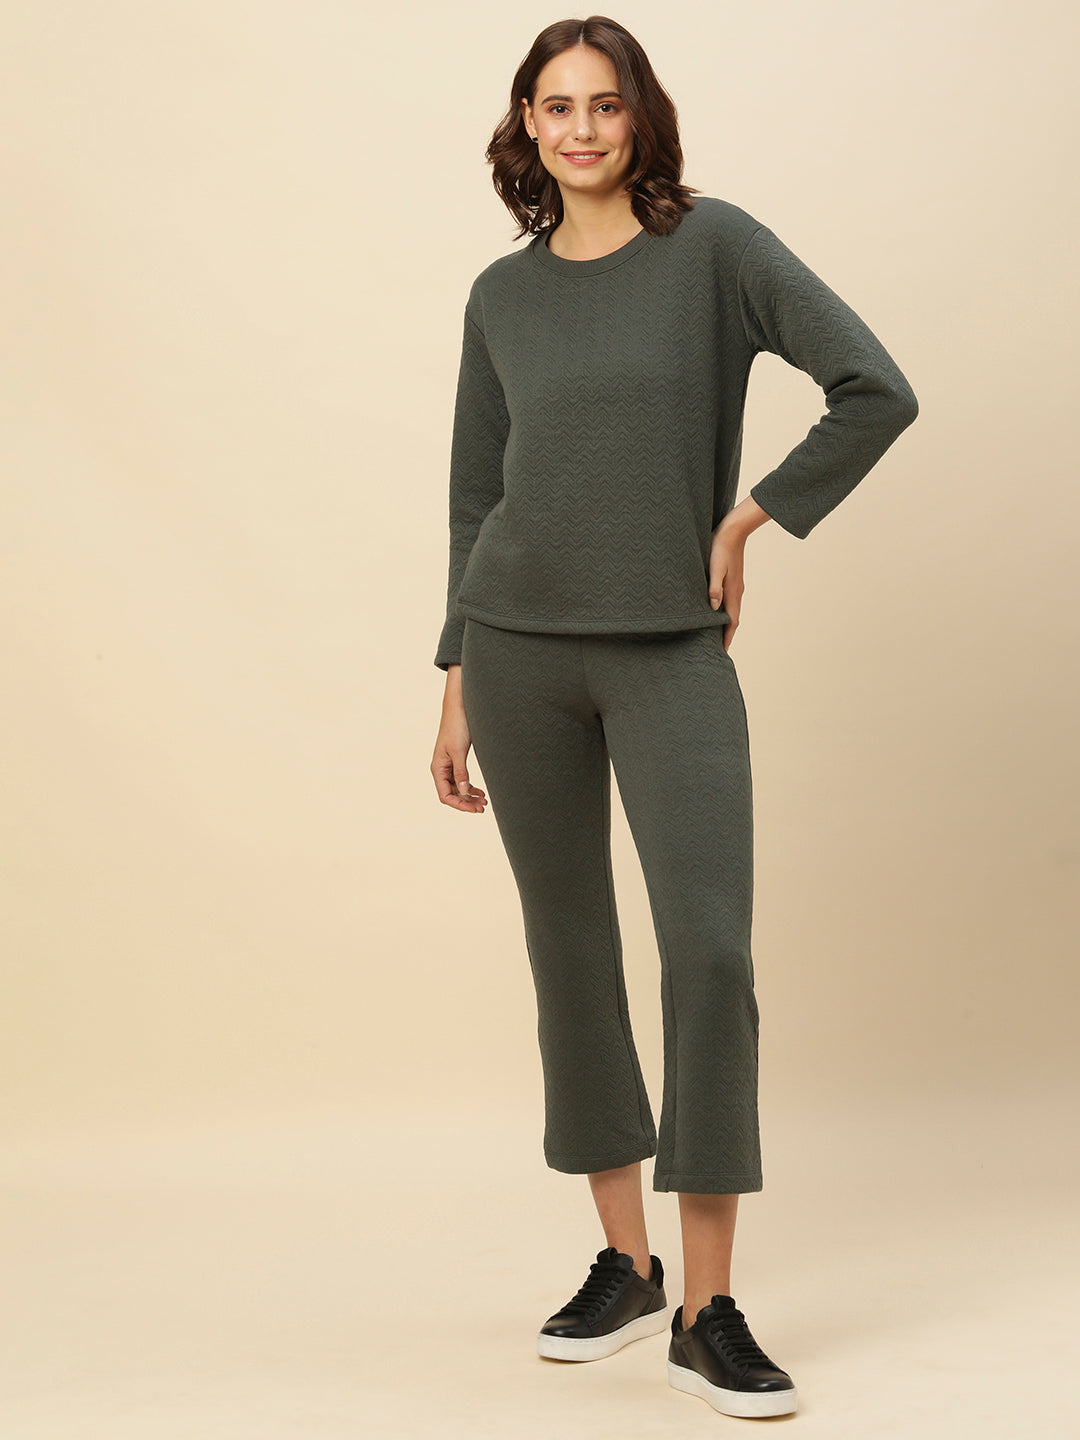 Quilted Jersey Sweatshirt & Slim Peg Pant Co - Ord Set